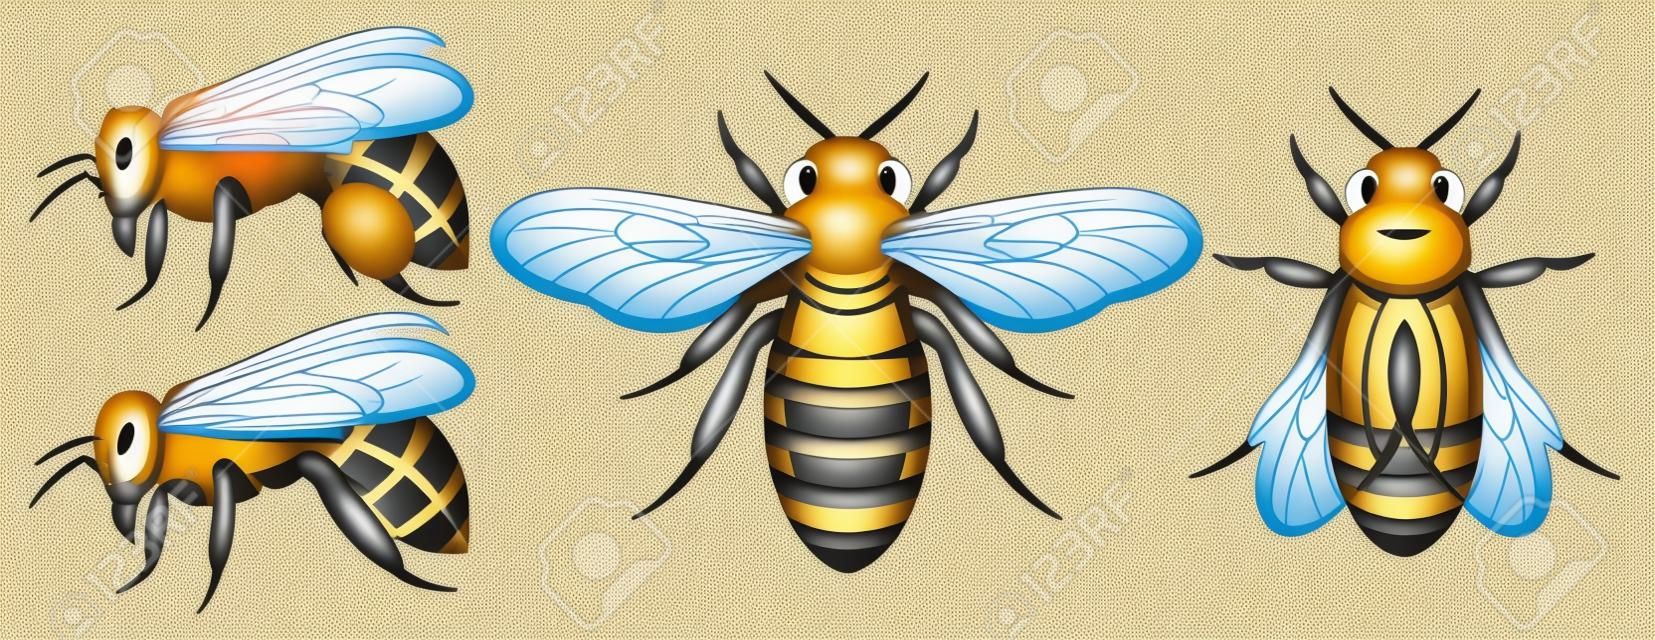 Set of different bees. Design elements. Colored vector illustration.